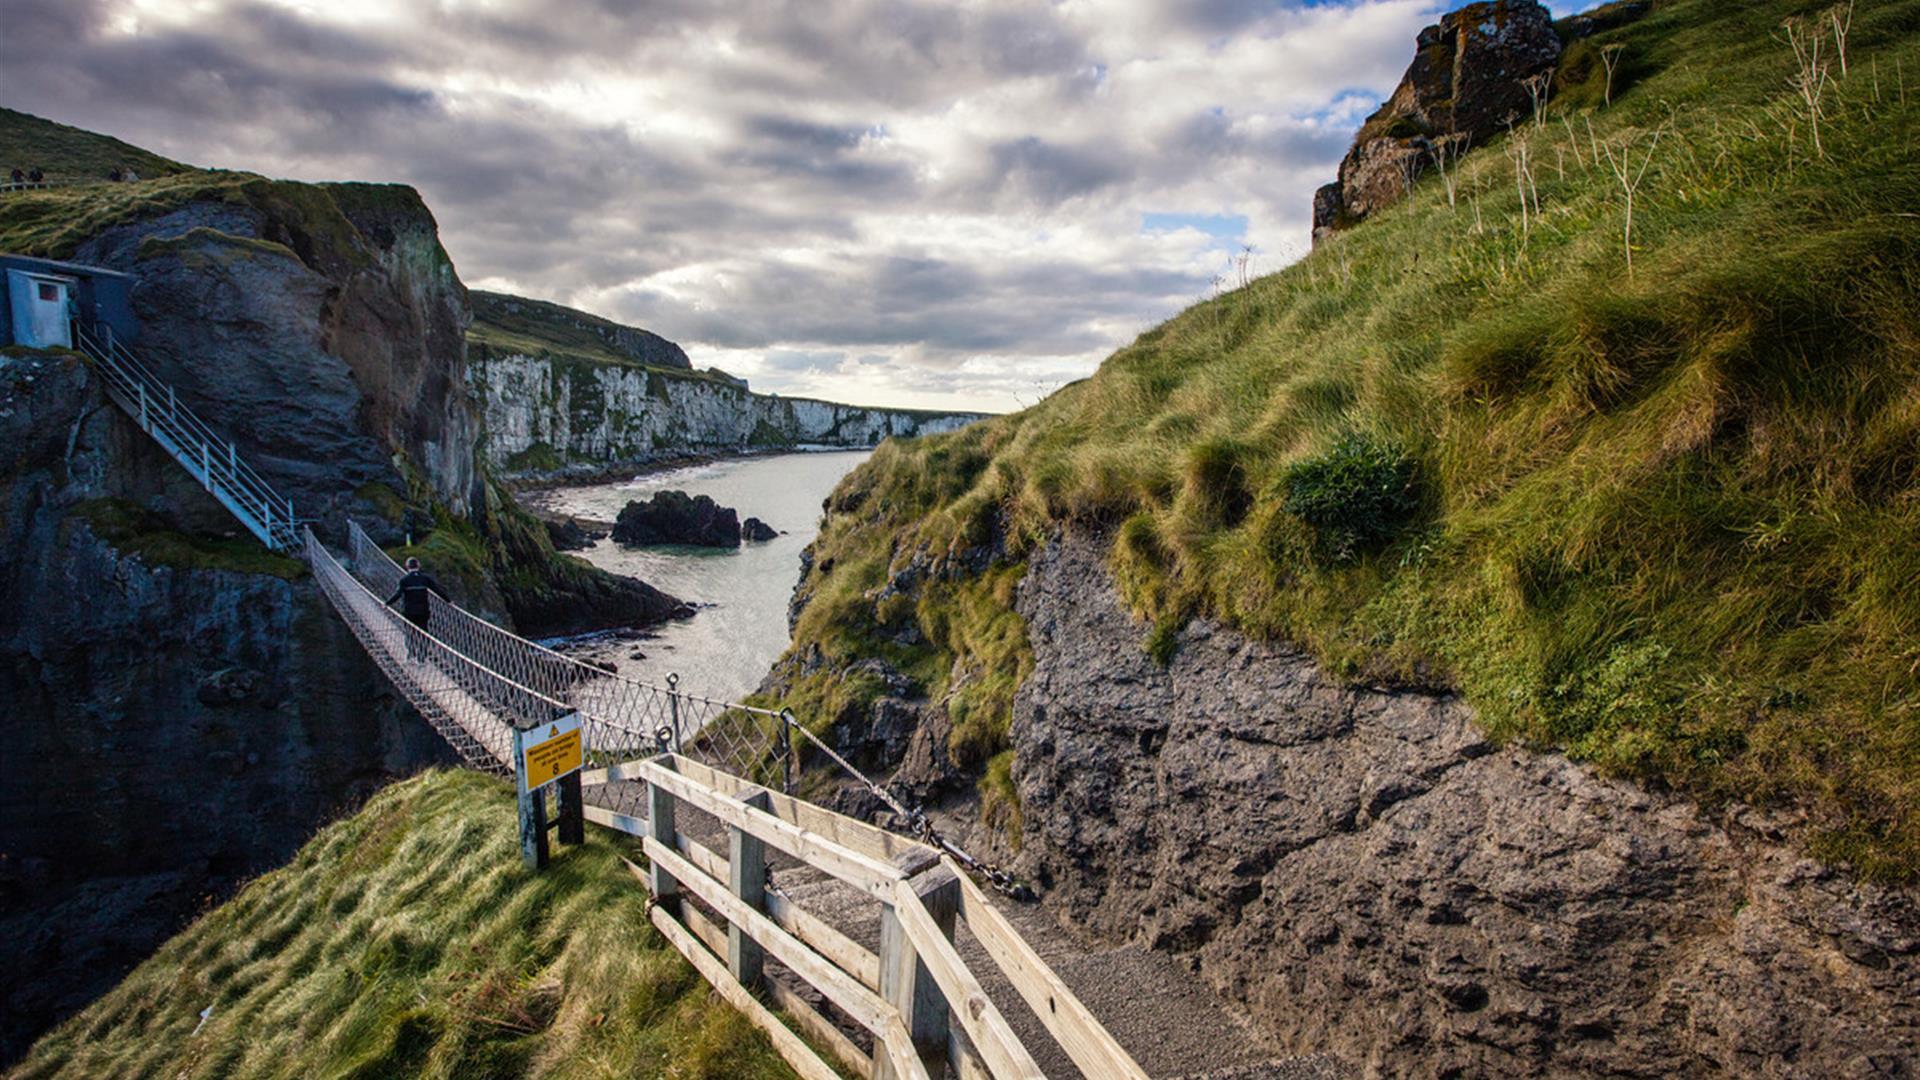 Carrick-a-Rede: The Most Famous Rope Bridge in the World? - The